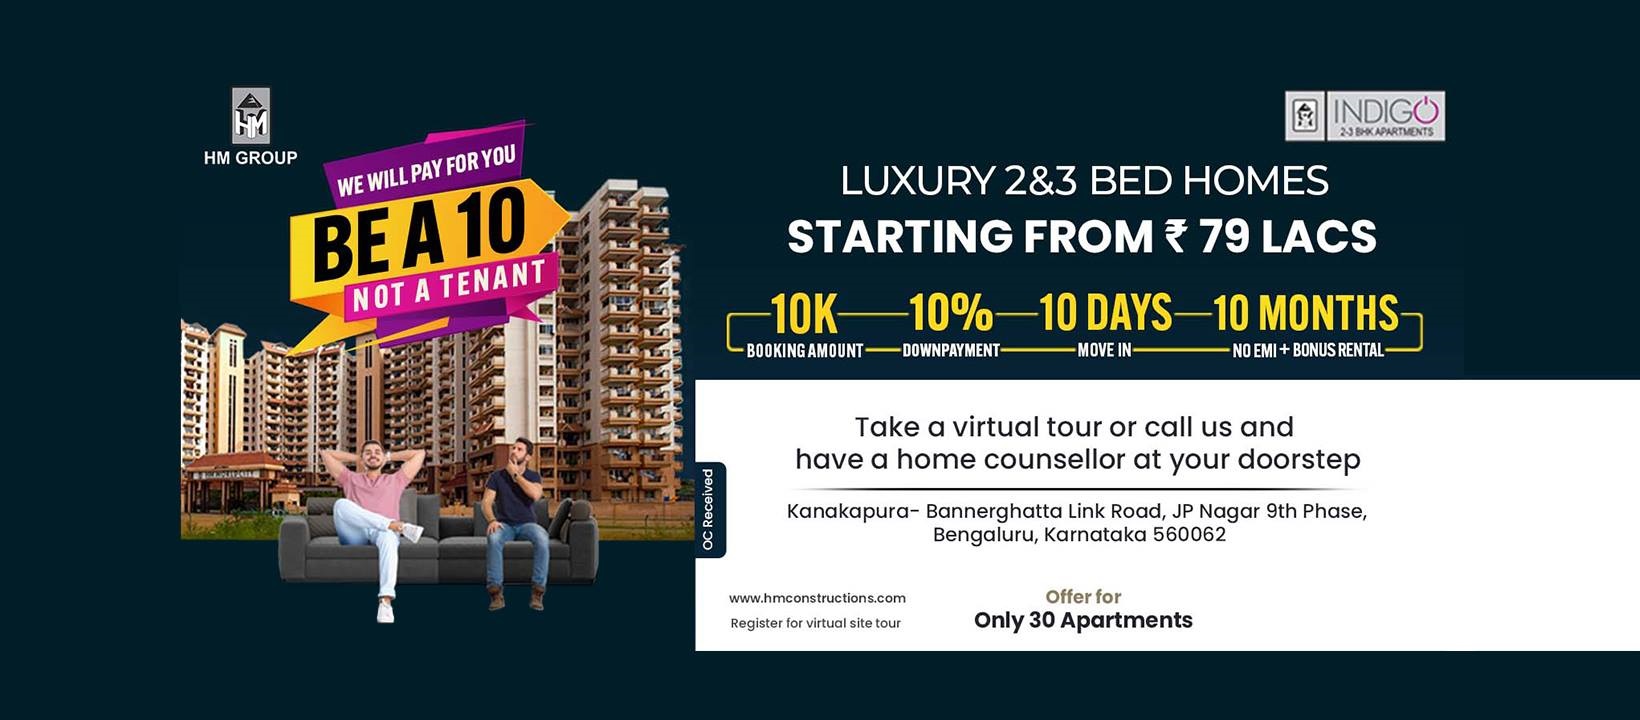 Luxurious 2 and 3 BHK home Starting Rs 79 Lac at HM Indigo, Bangalore